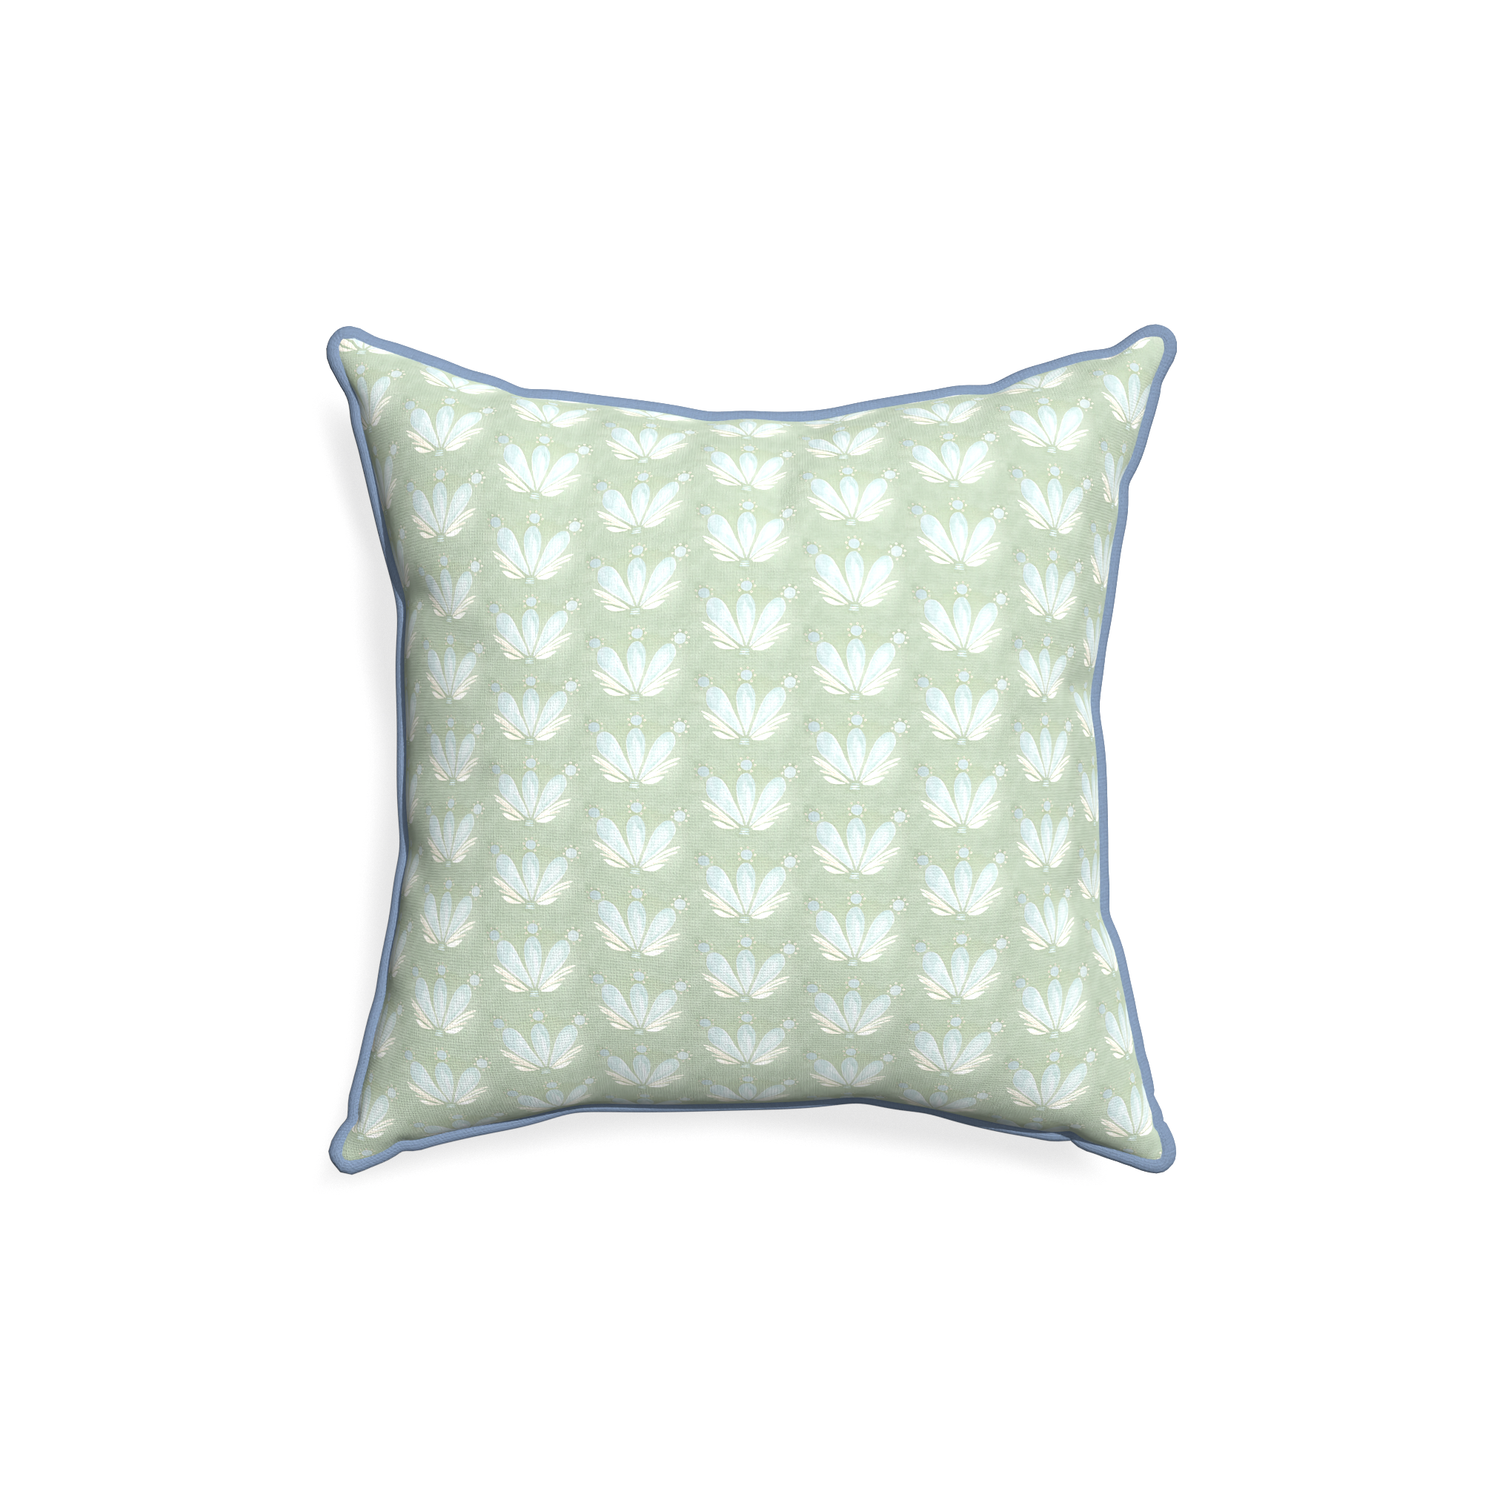 18-square serena sea salt custom blue & green floral drop repeatpillow with sky piping on white background